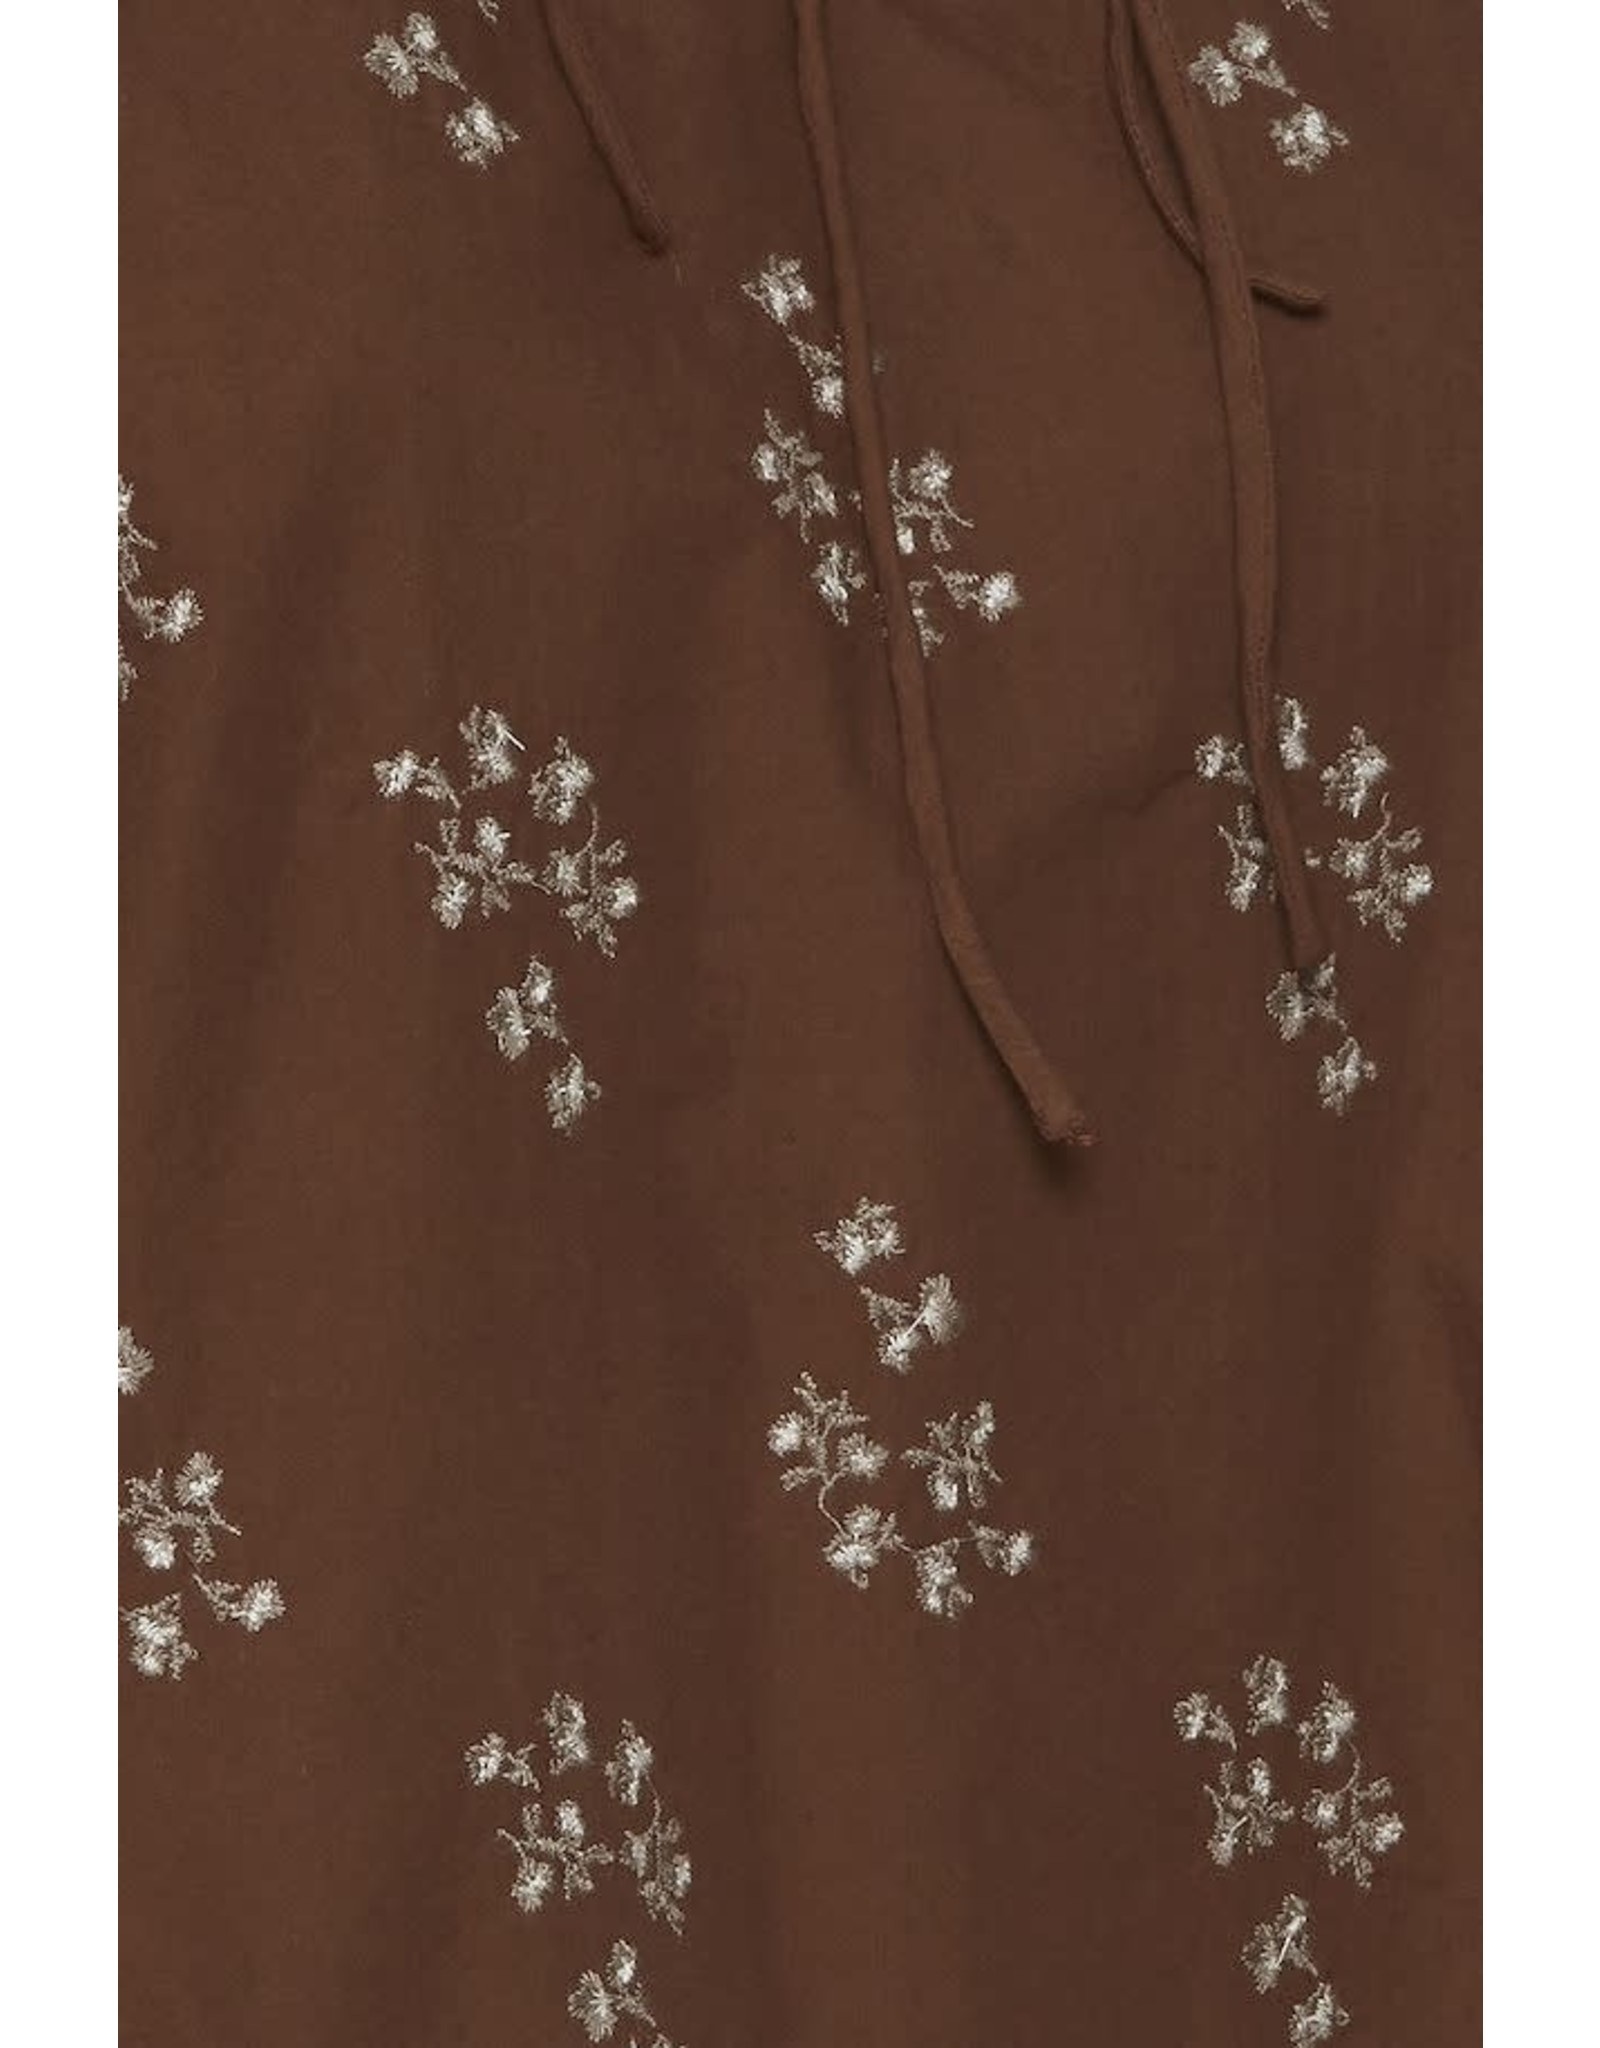 BNG - Fields Embroidered Blouse